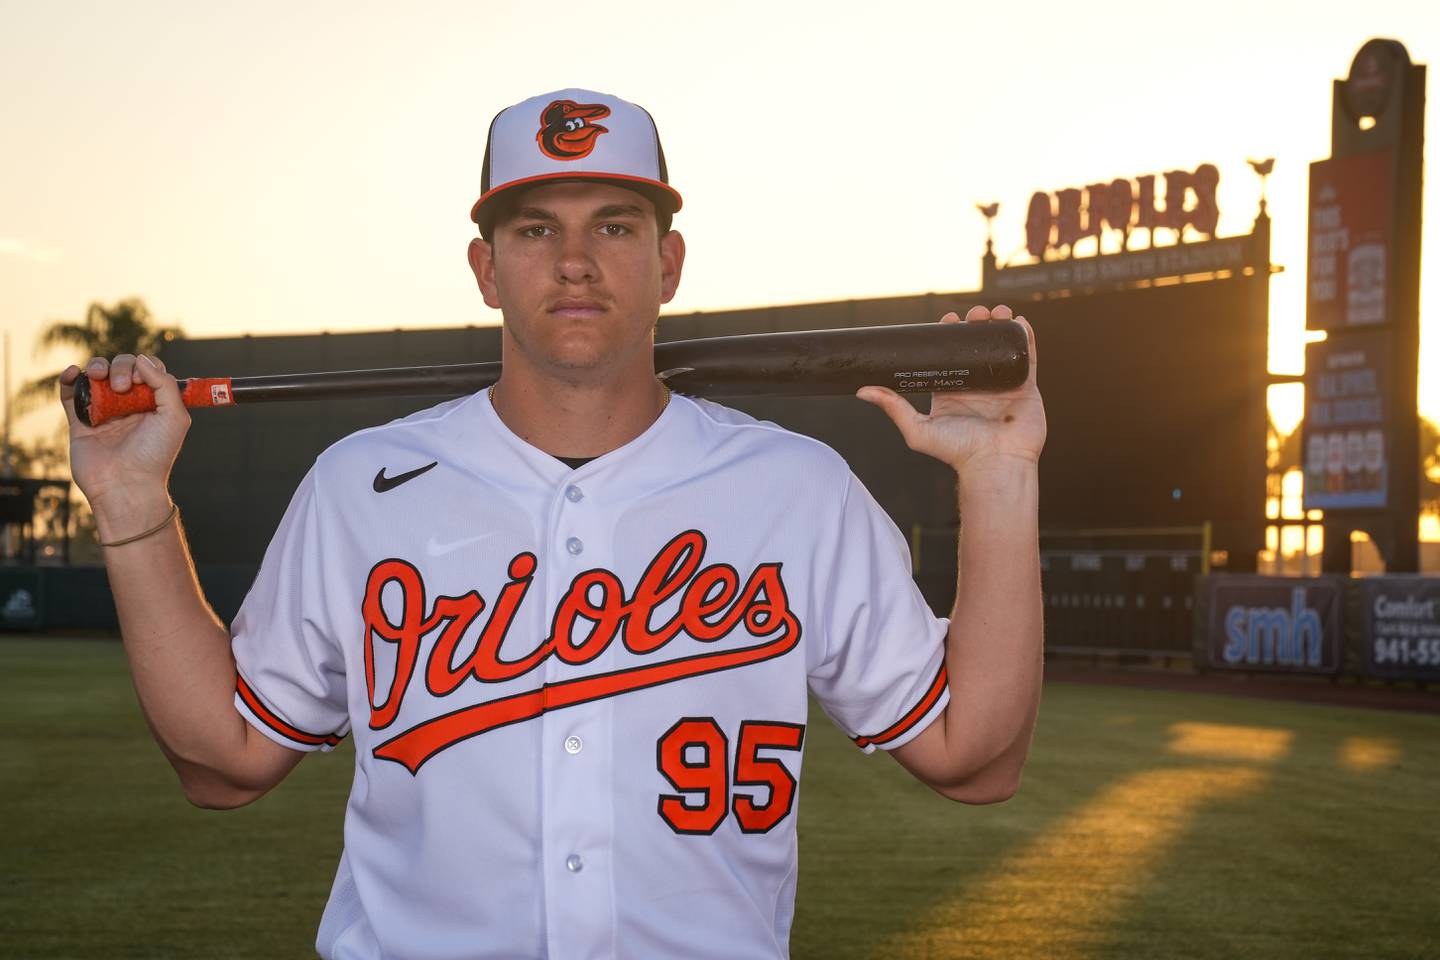 Coby Mayo (95) poses for a portrait during Photo Day at Ed Smith Stadium in Sarasota on 2/23/23. The Baltimore Orioles’ Spring Training session runs from mid-February through the end of March.